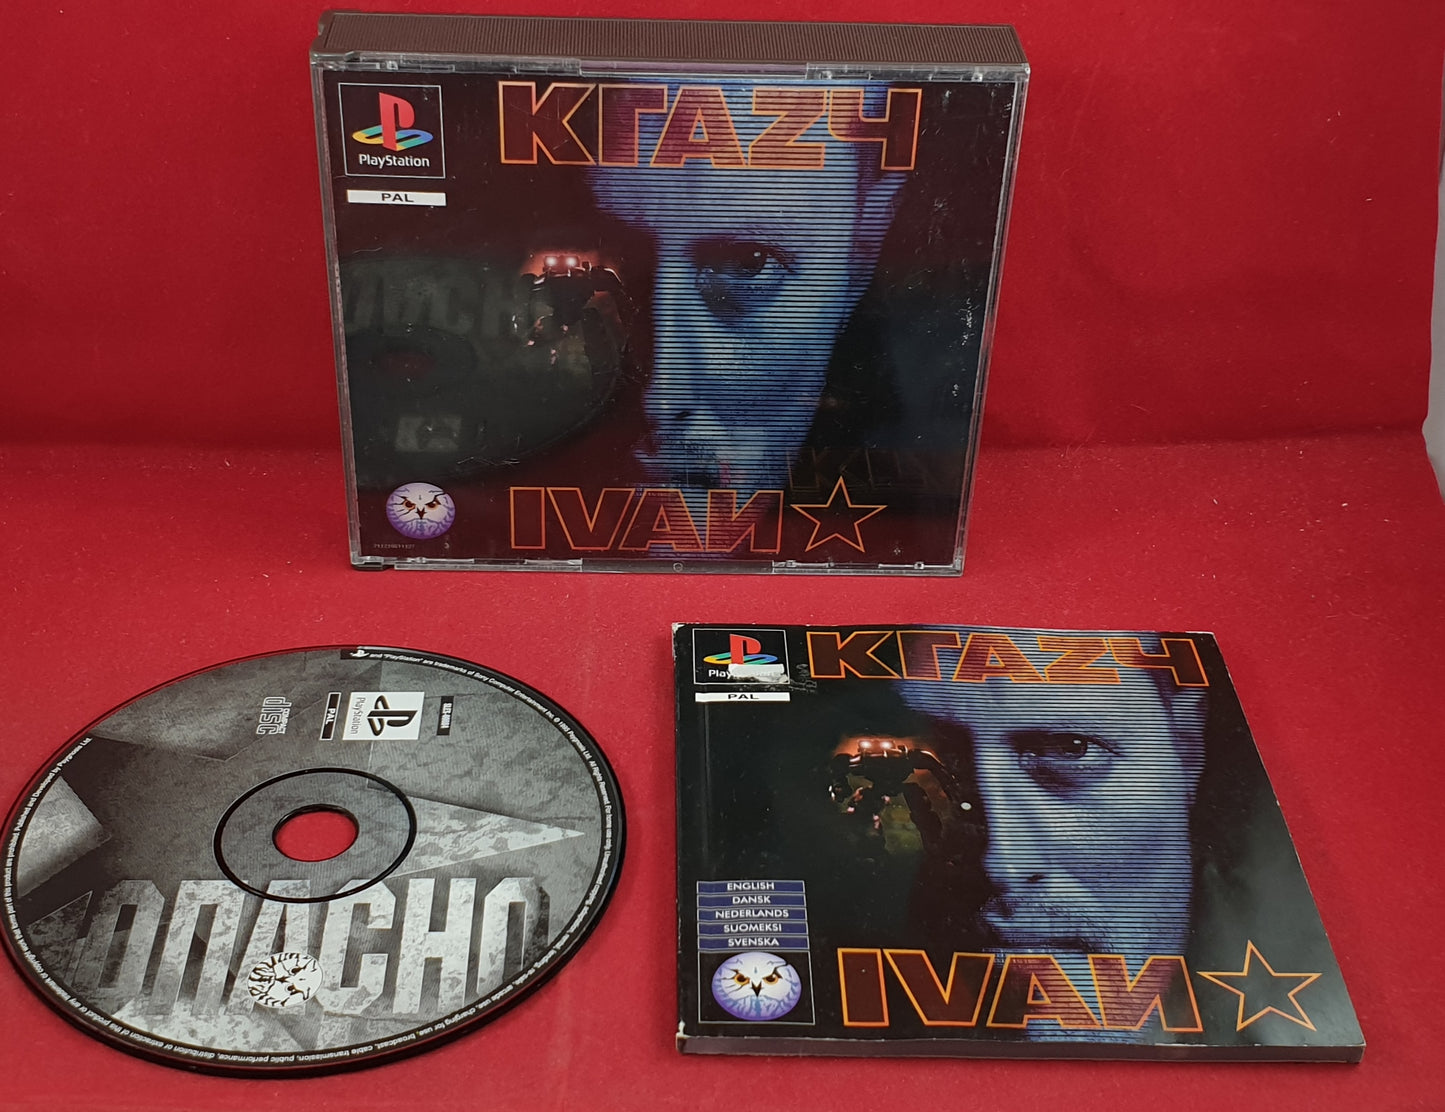 Krazy Ivan Sony Playstation 1 (PS1) Game